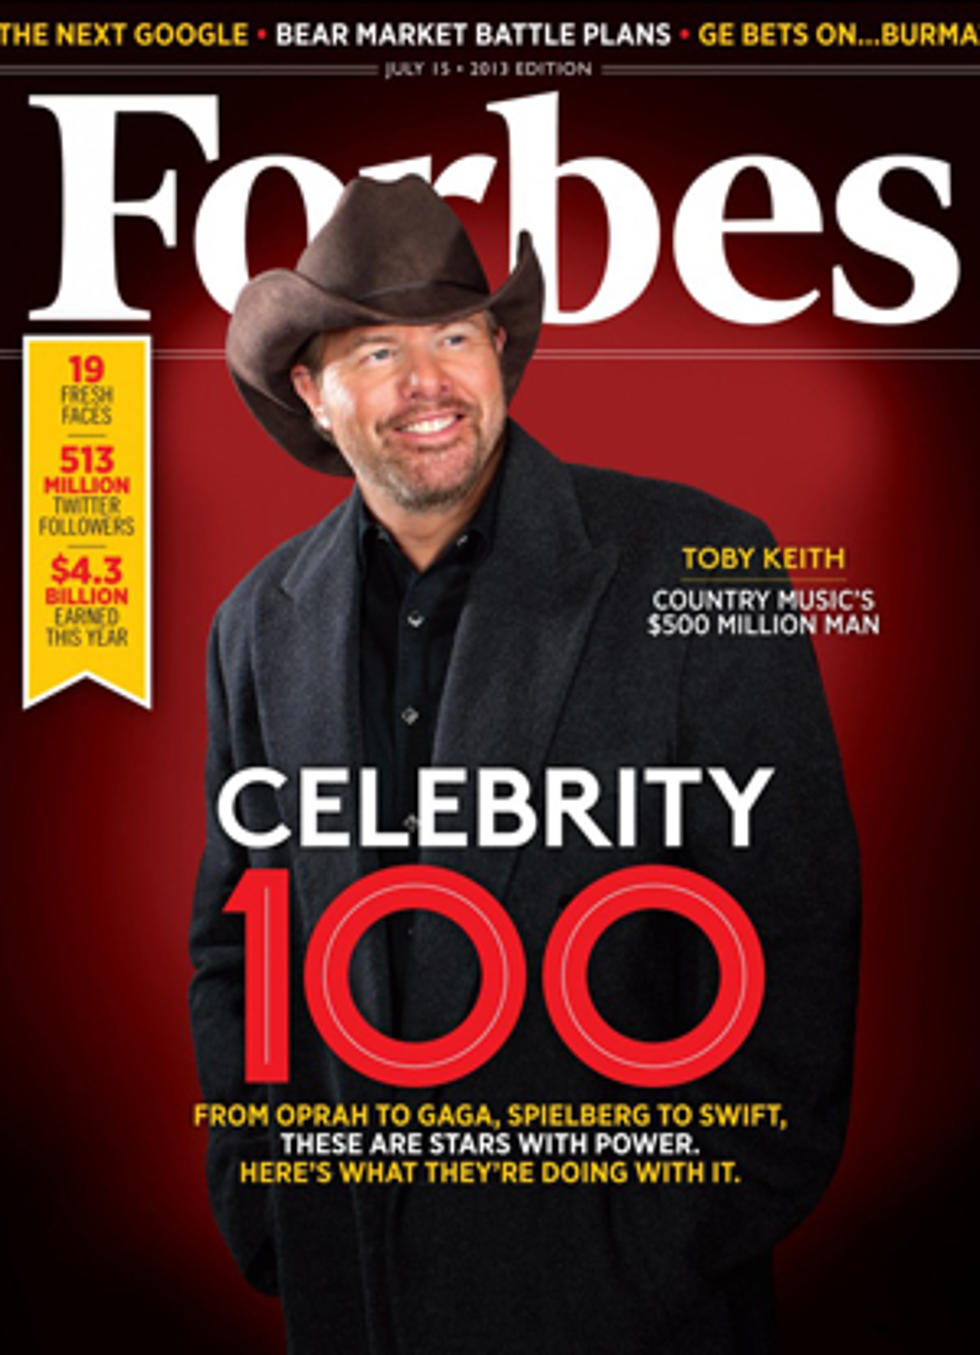 Toby Keith Admits He Resisted Recent Forbes Magazine Cover